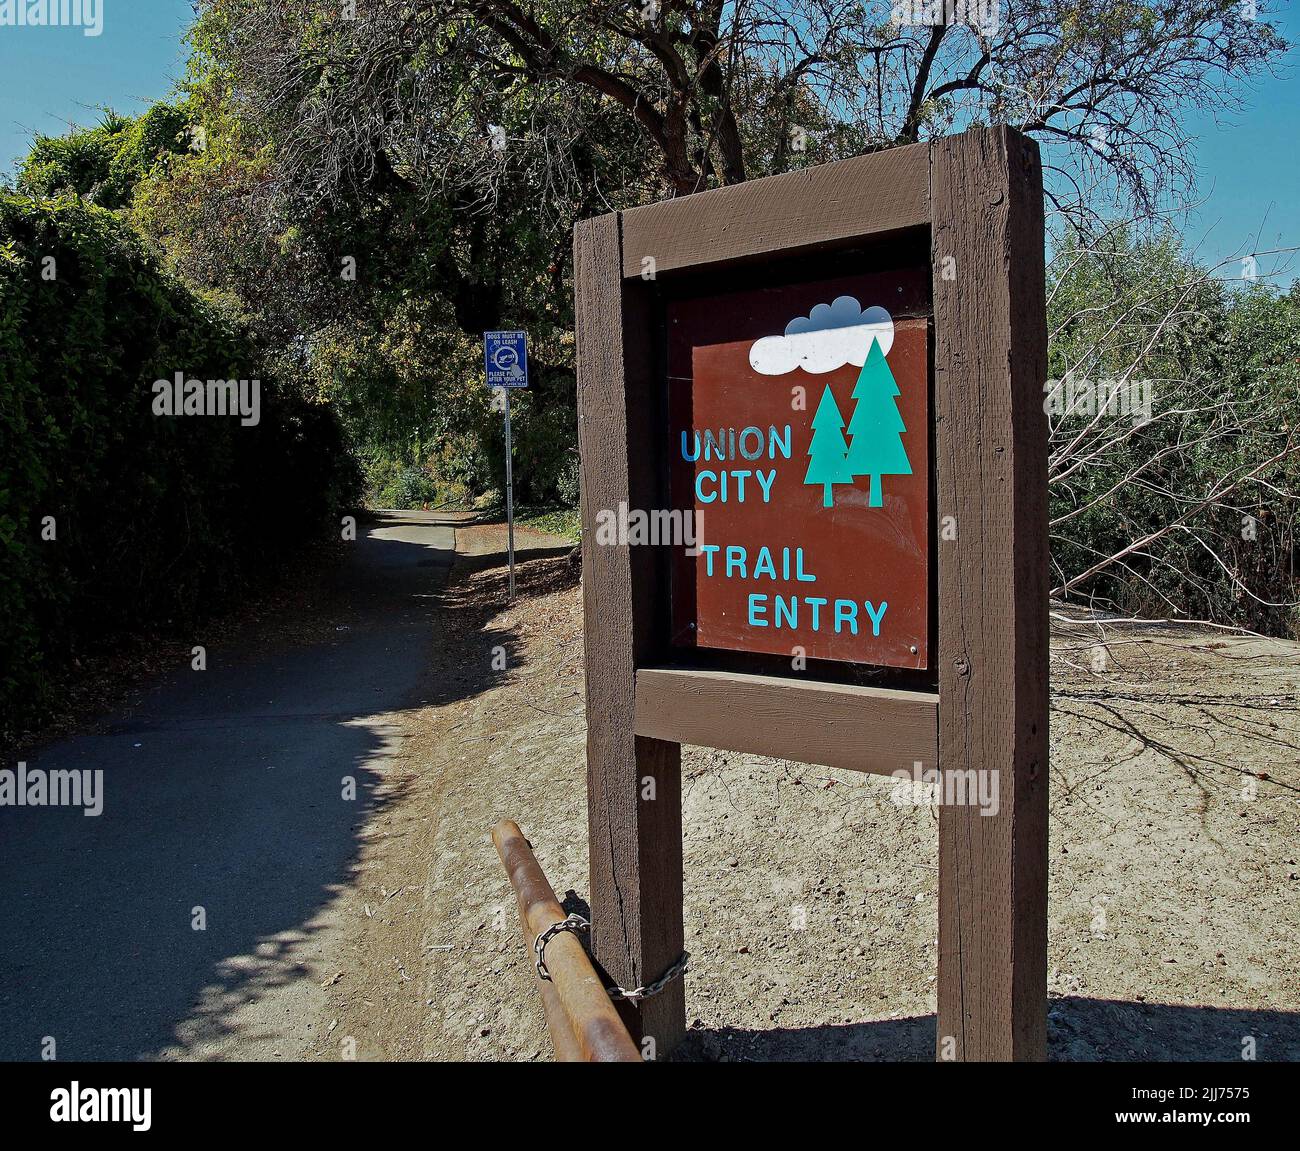 Old Alameda Creek Trail entry sign in Union City, California Stock Photo